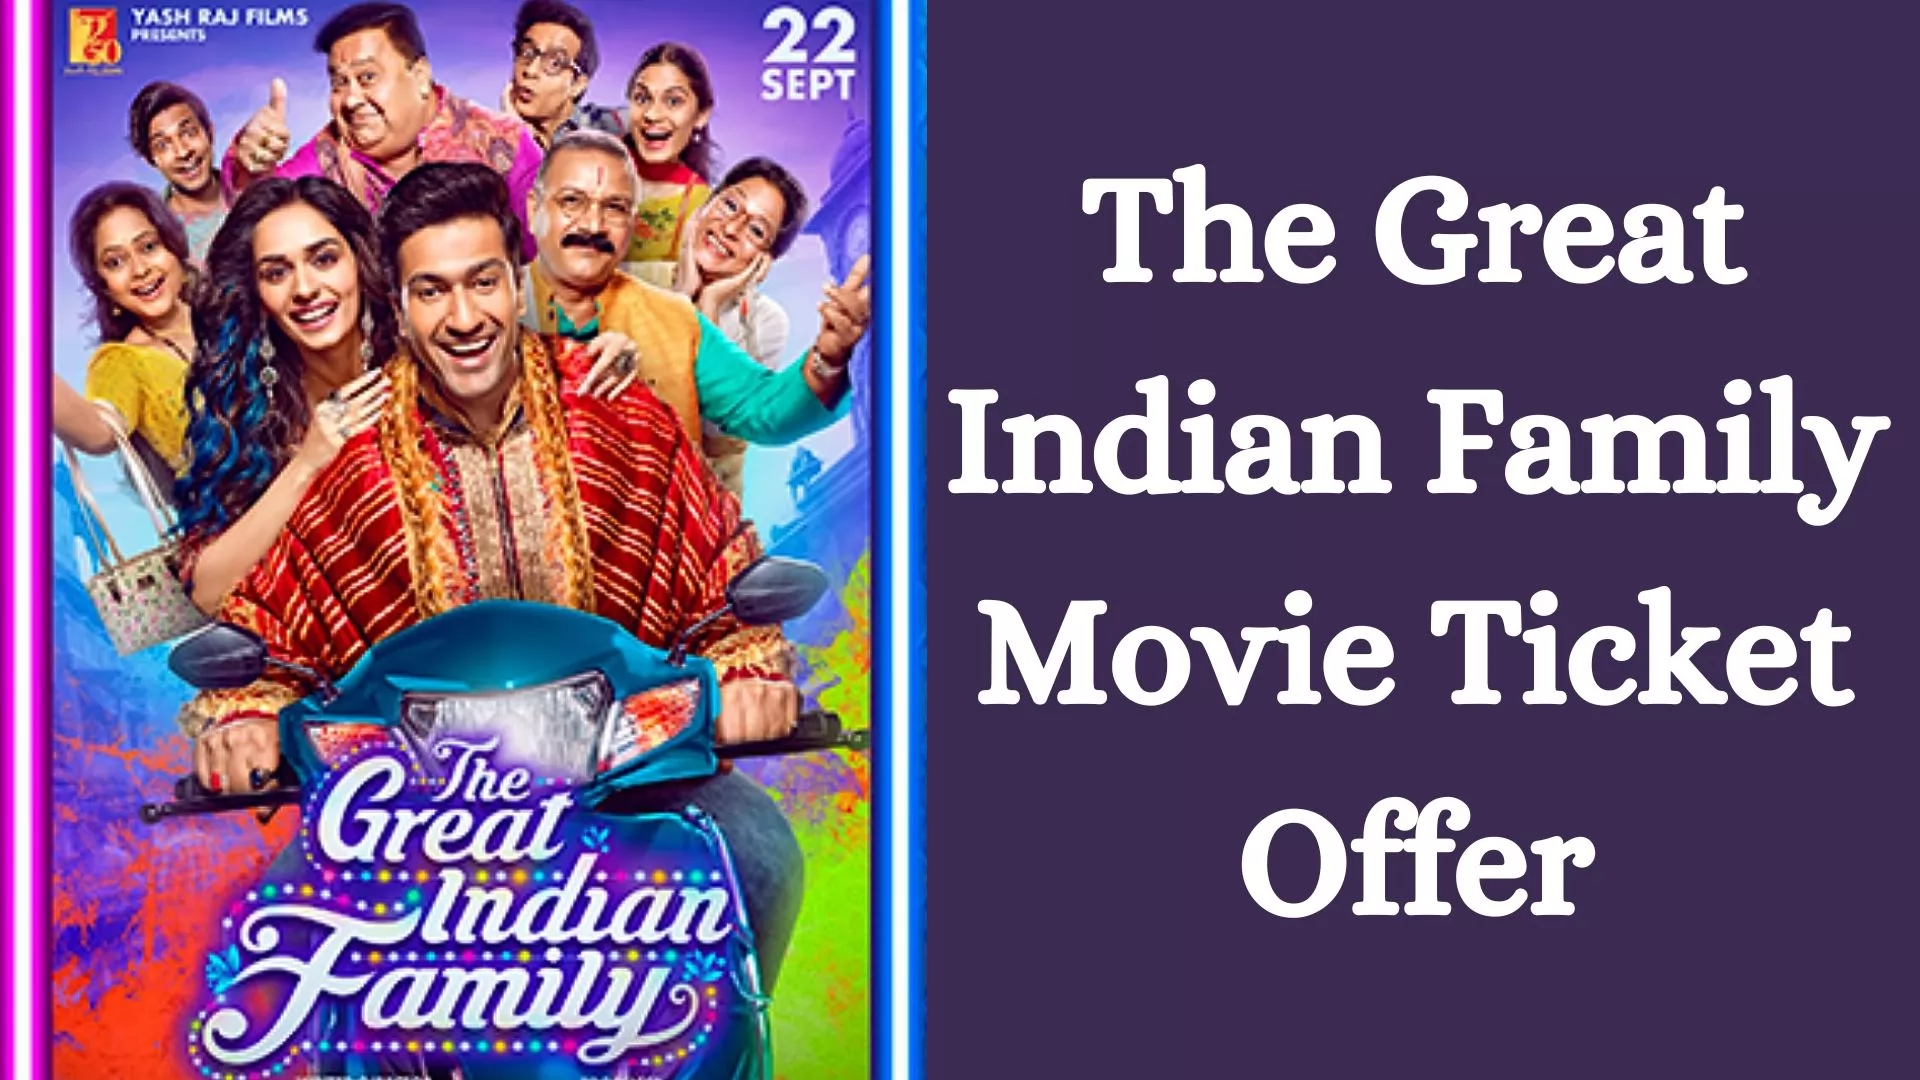 The Great Indian Family Movie Ticket Offer